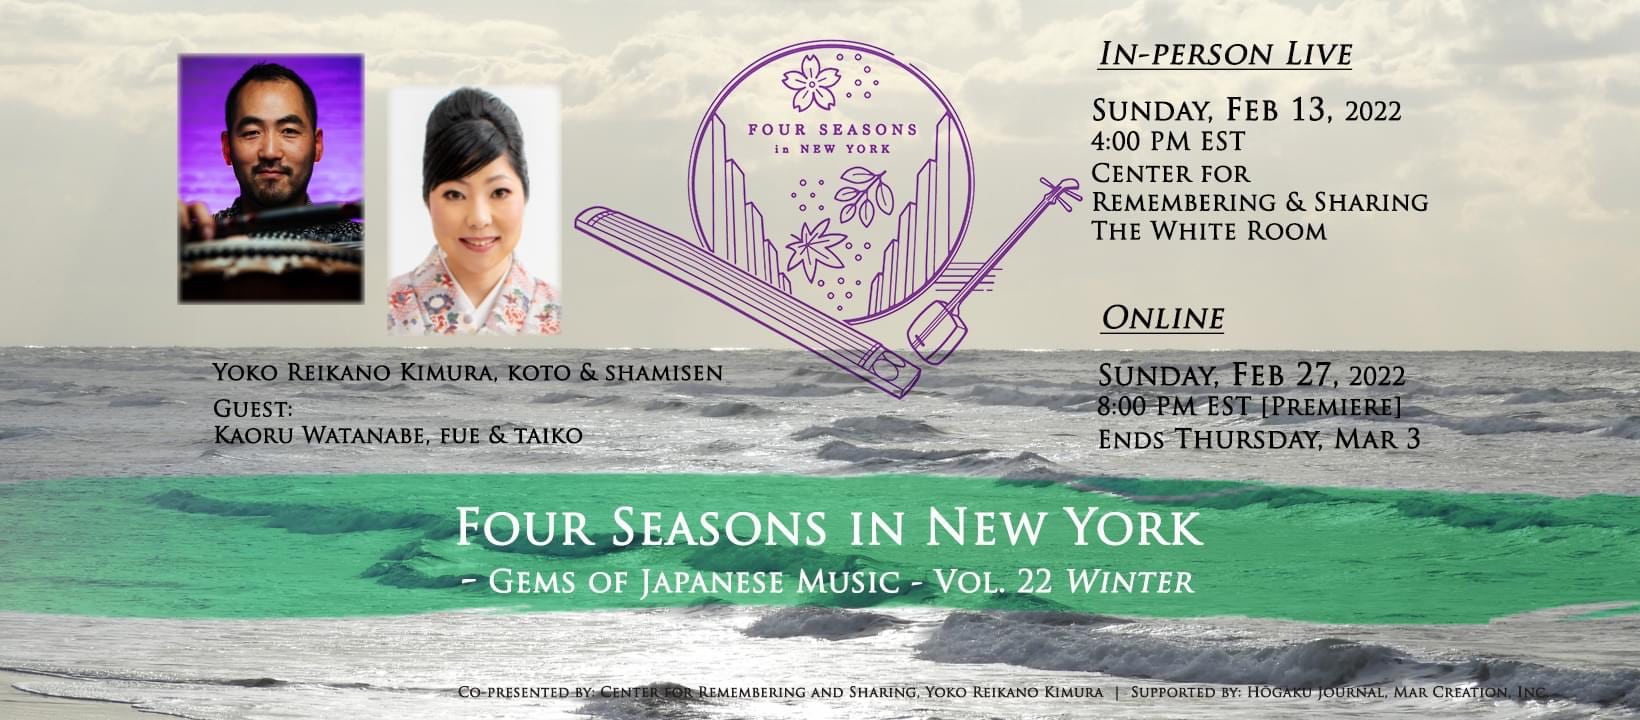 Four Seasons in NY: Gems of Japanese Music Vol. 22